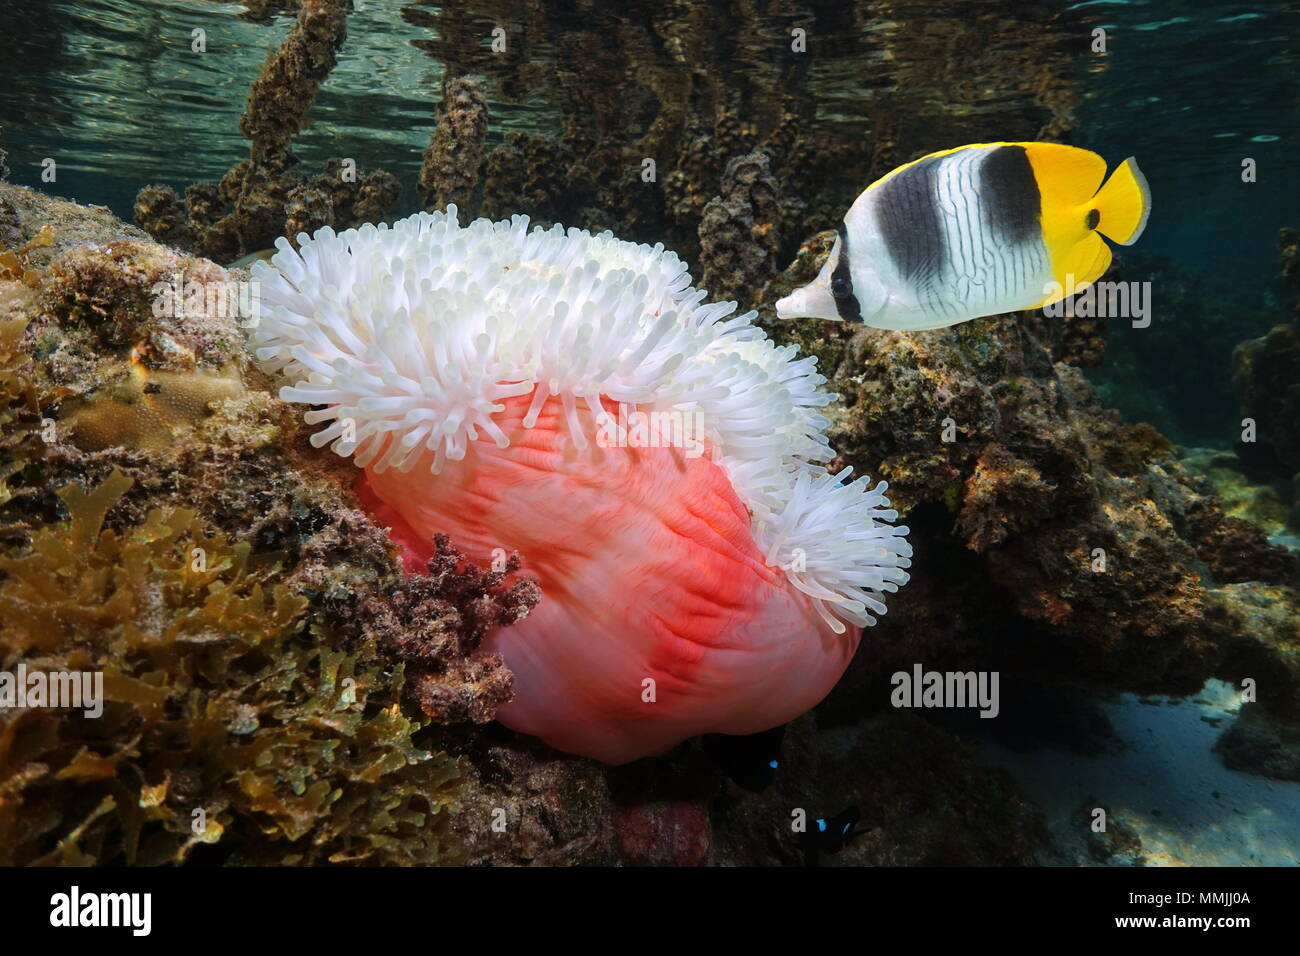 A tropical fish Pacific double-saddle butterflyfish with a Magnificent sea anemone underwater, Pacific ocean, Polynesia, American Samoa Stock Photo